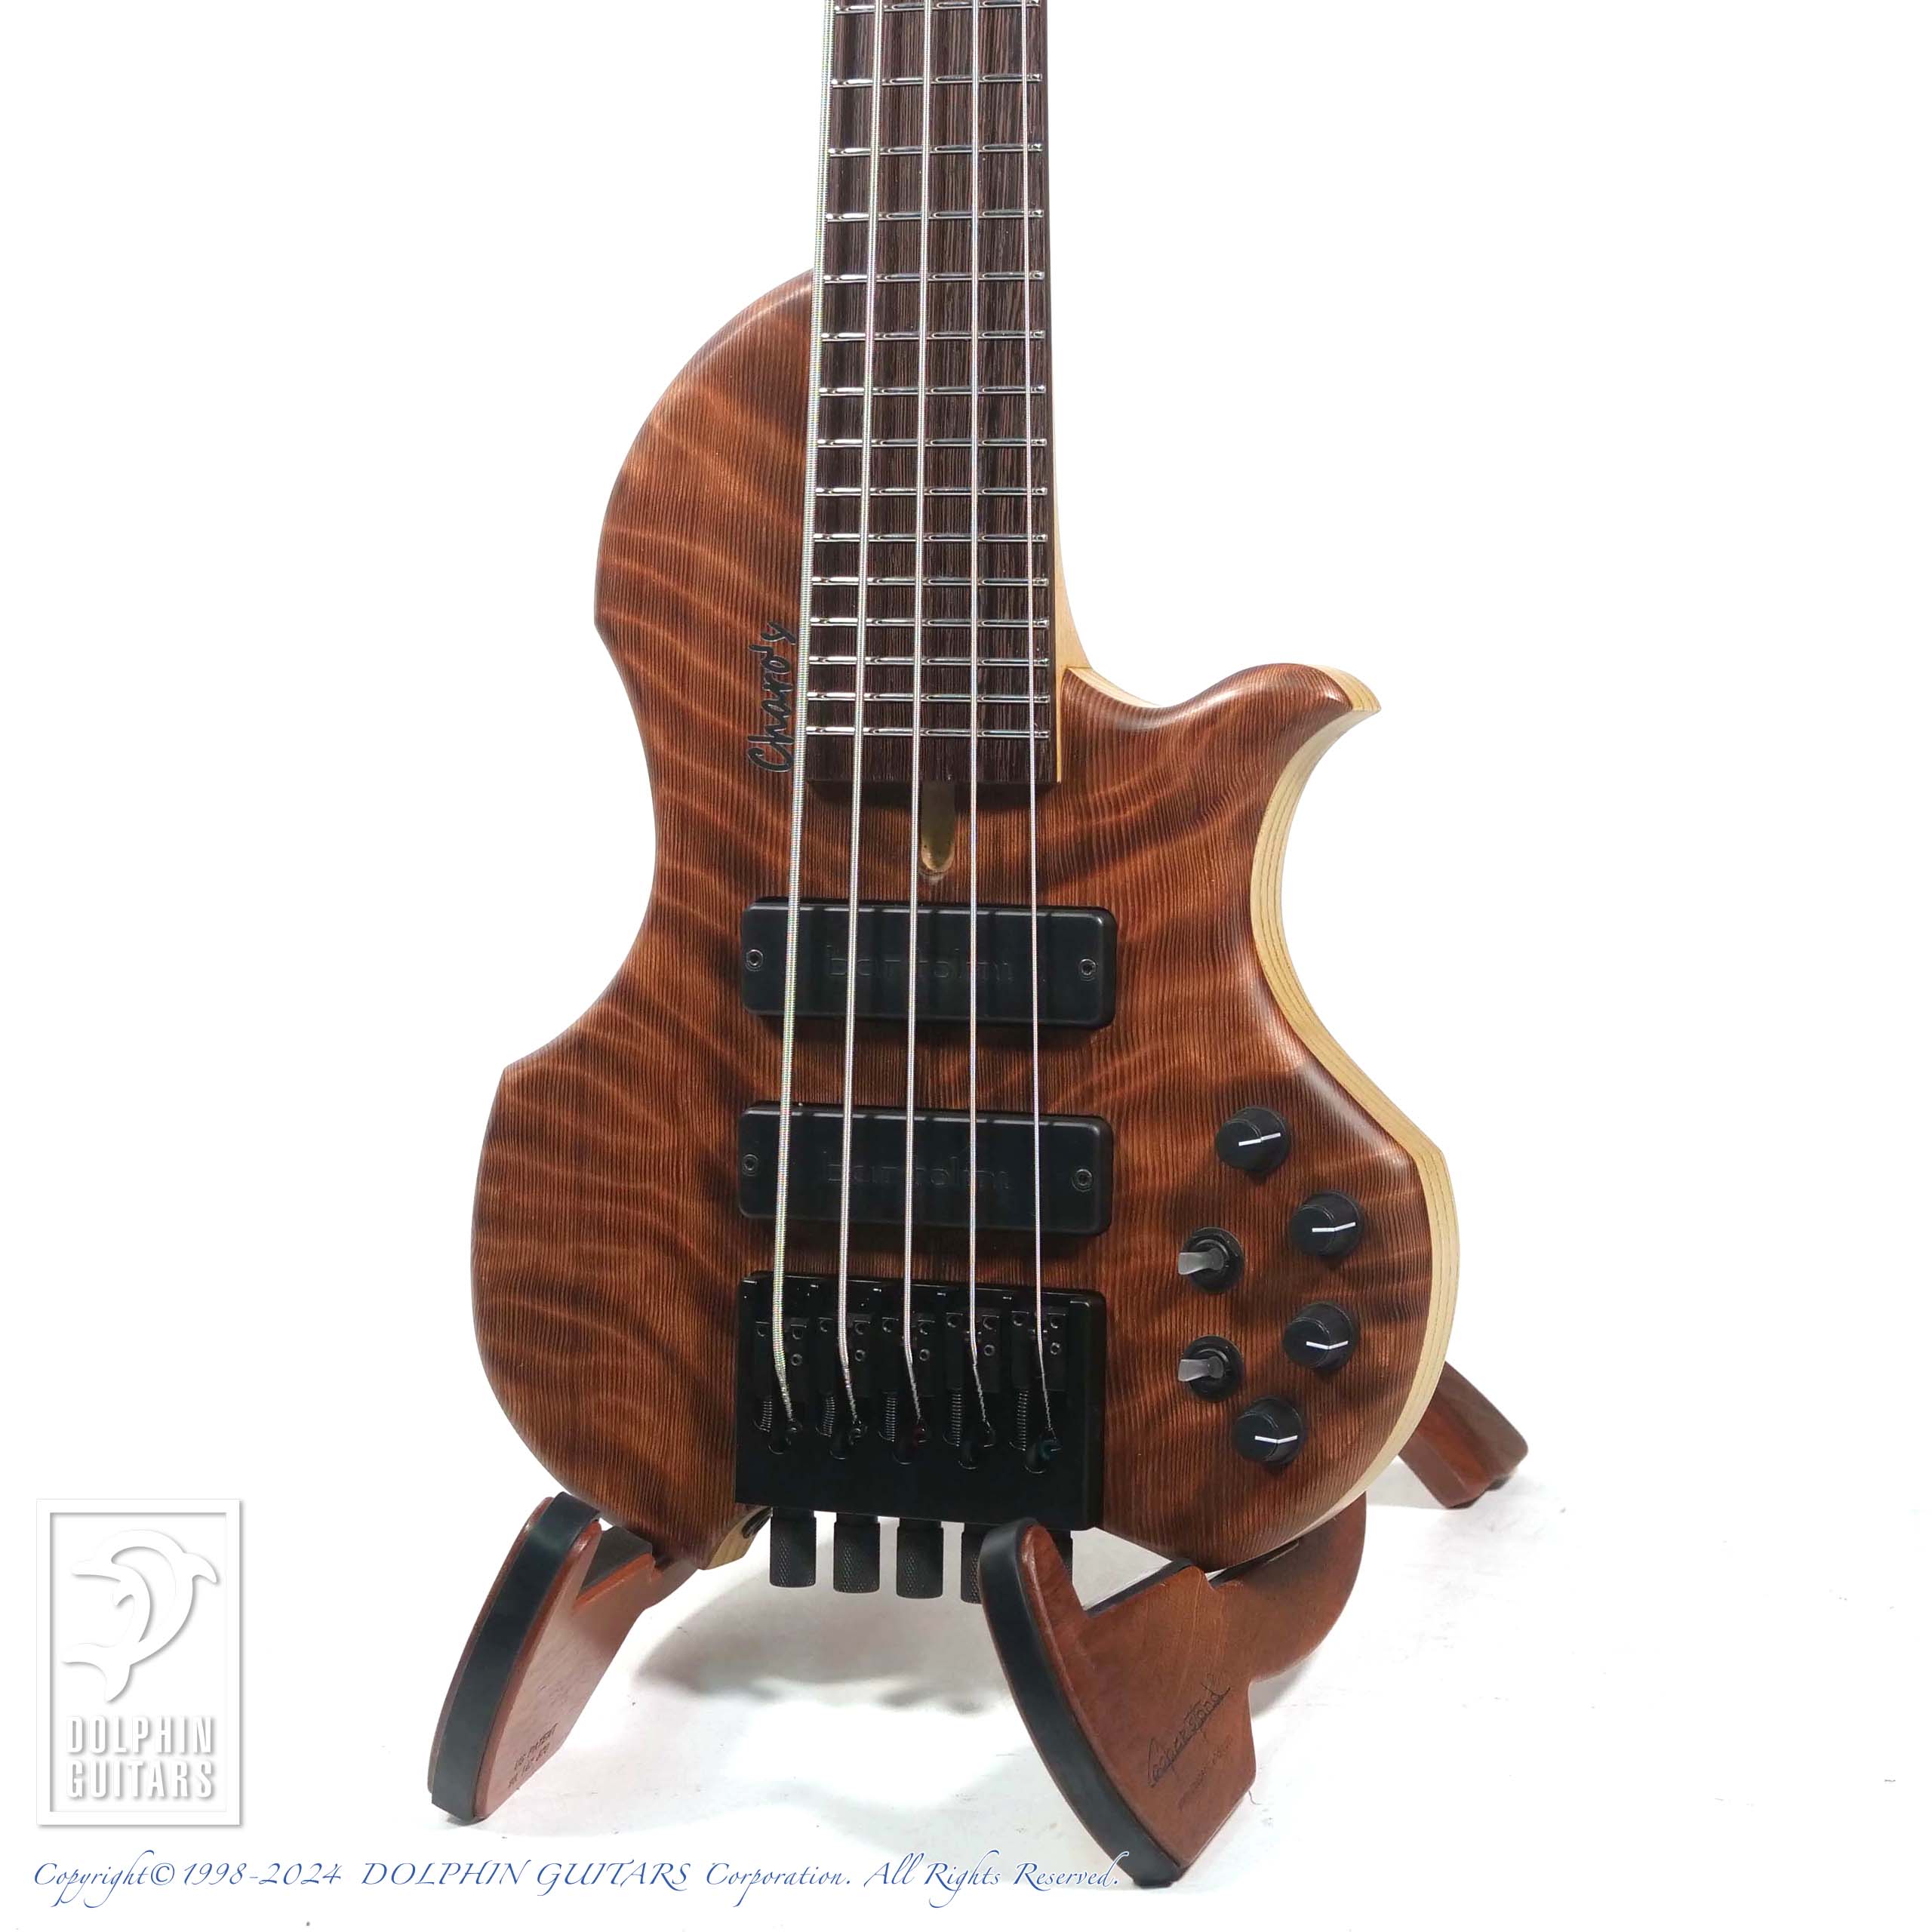 Charo's:CH-B5 Compact Headless Bass (Full Cover Flame Redwood Top / Hard Maple Neck)